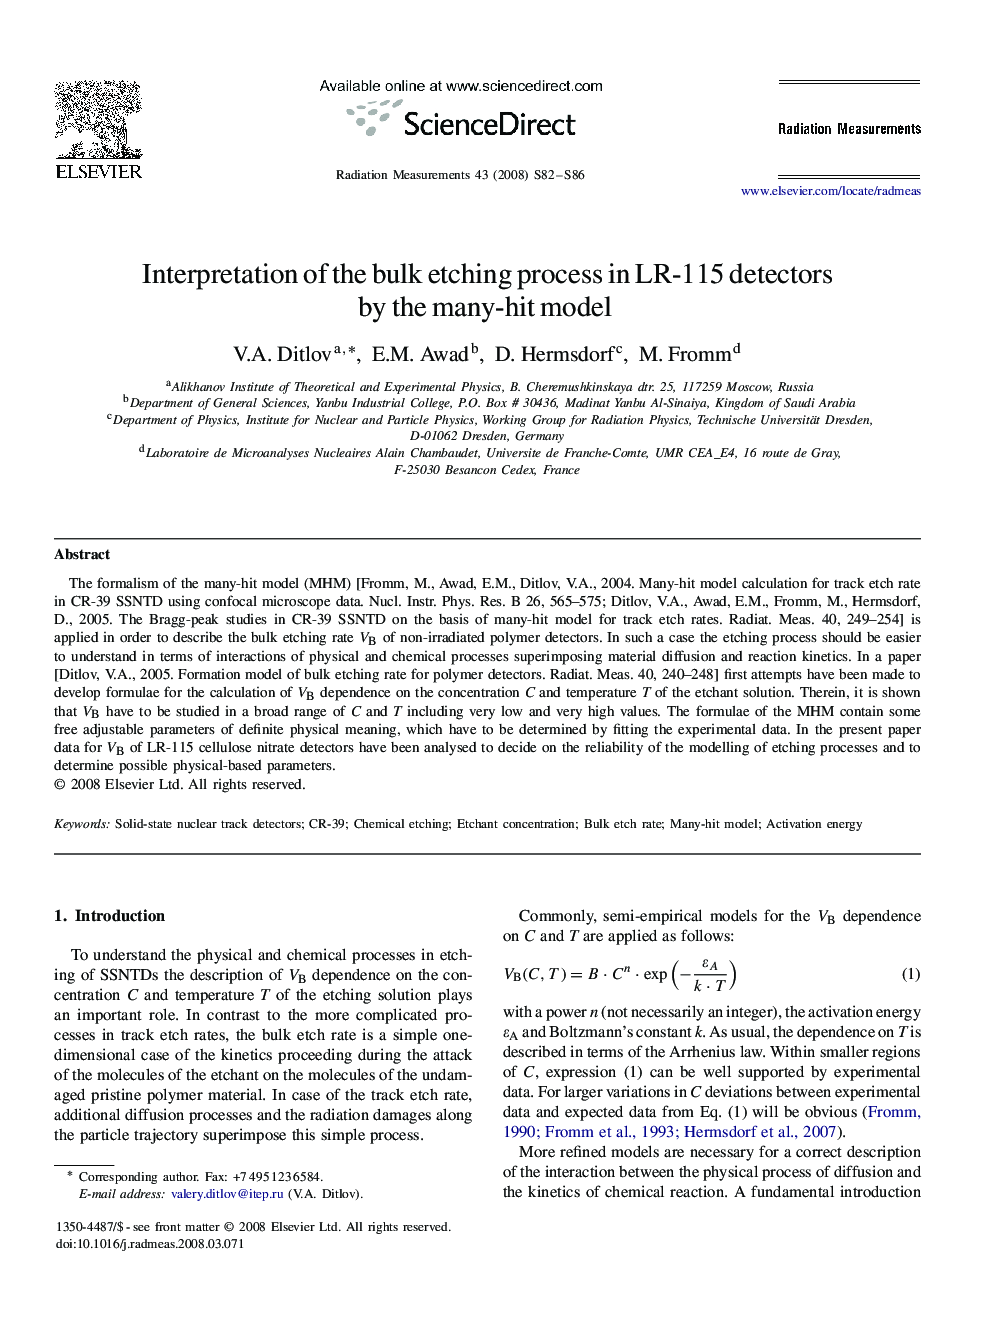 Interpretation of the bulk etching process in LR-115 detectors by the many-hit model